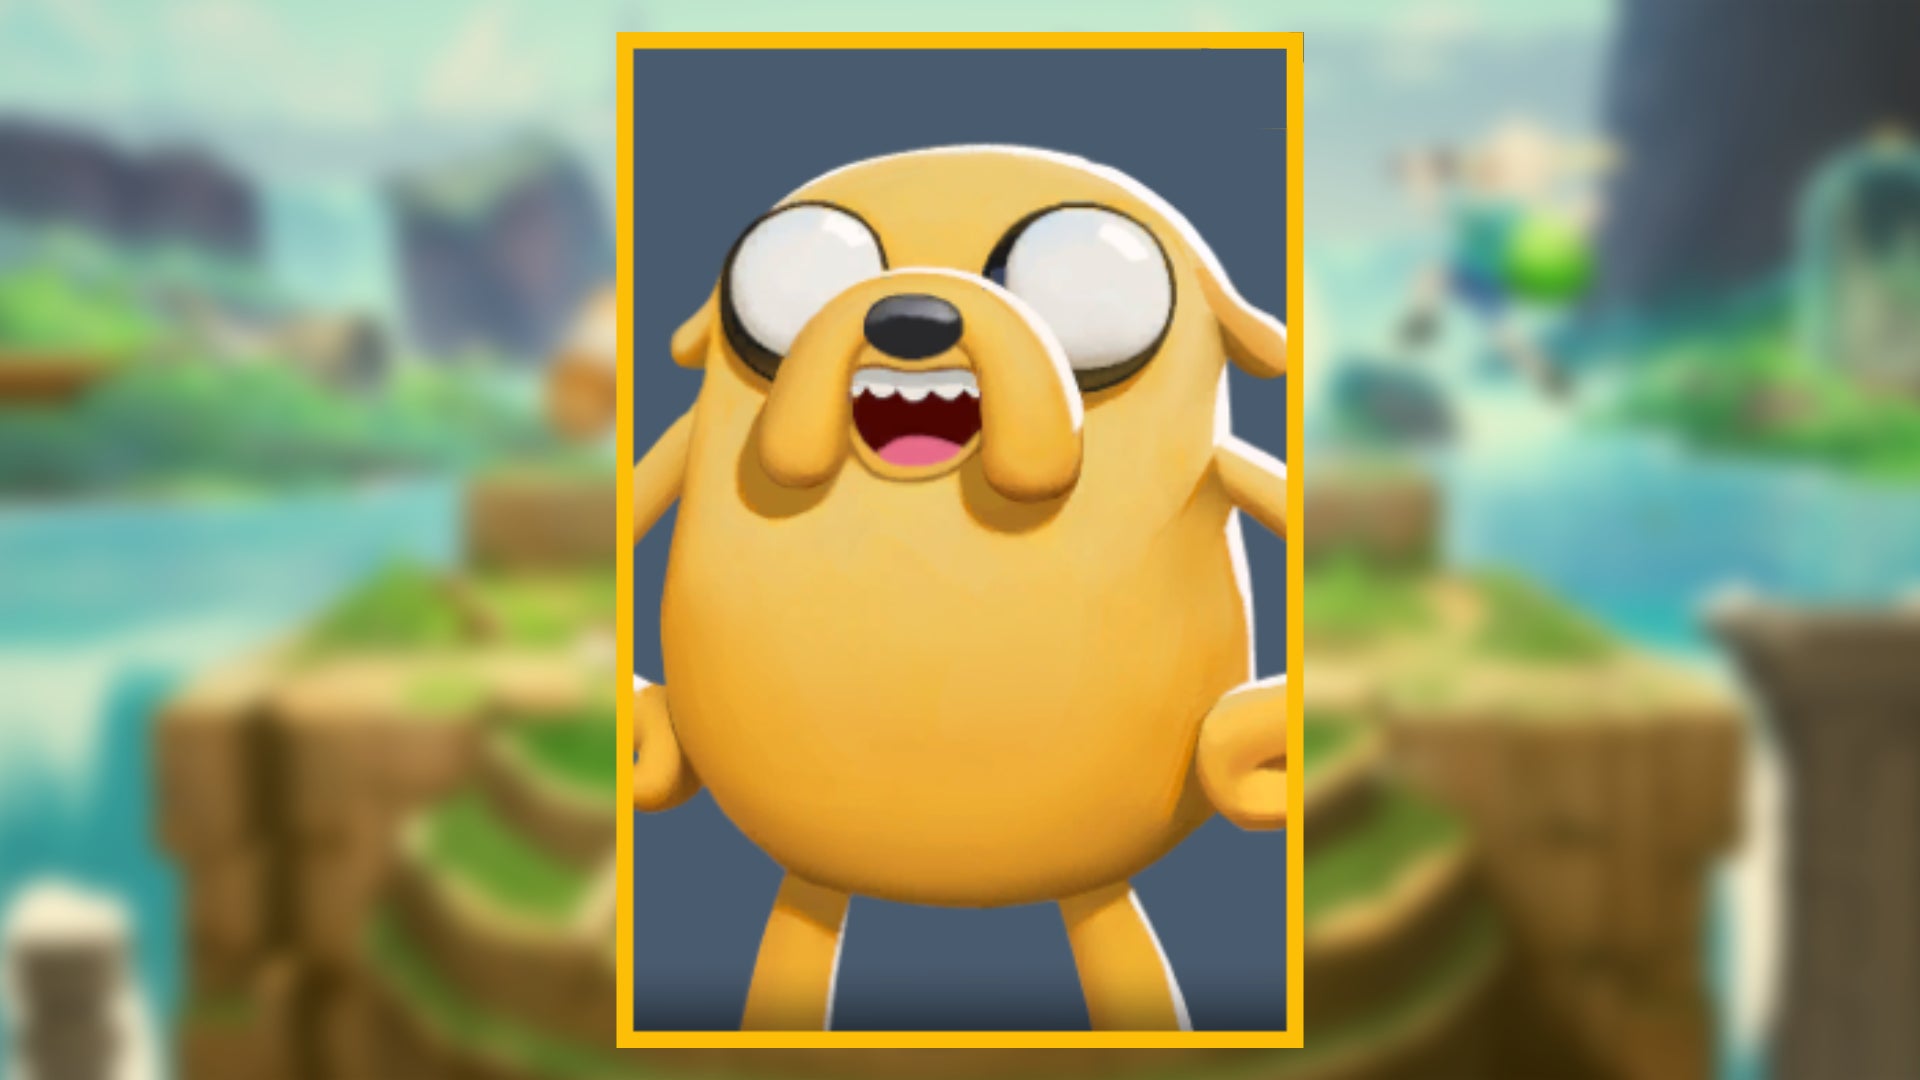 The character portrait of Jake, a playable character in MultiVersus, against a blurred background.